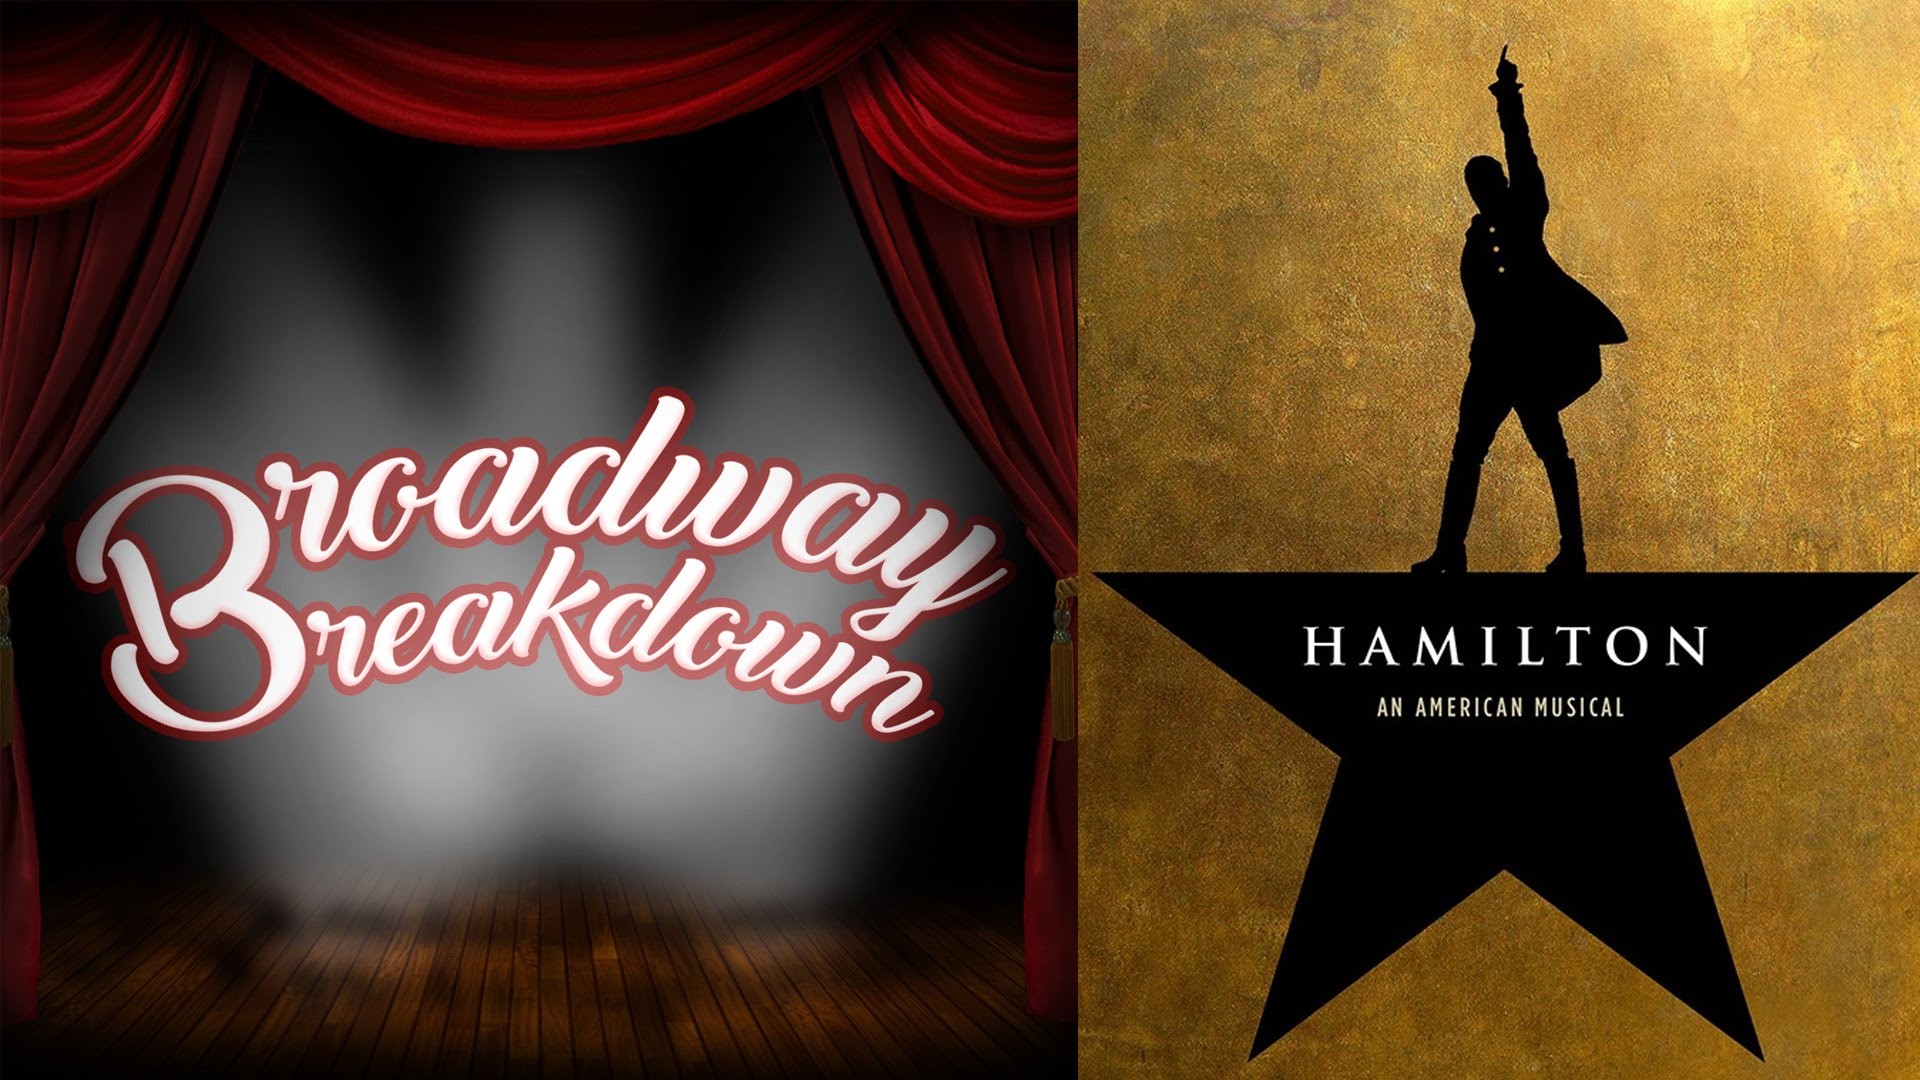 1920x1080 Hamilton: An American Musical Discussion | Broadway Breakdown - YouTube